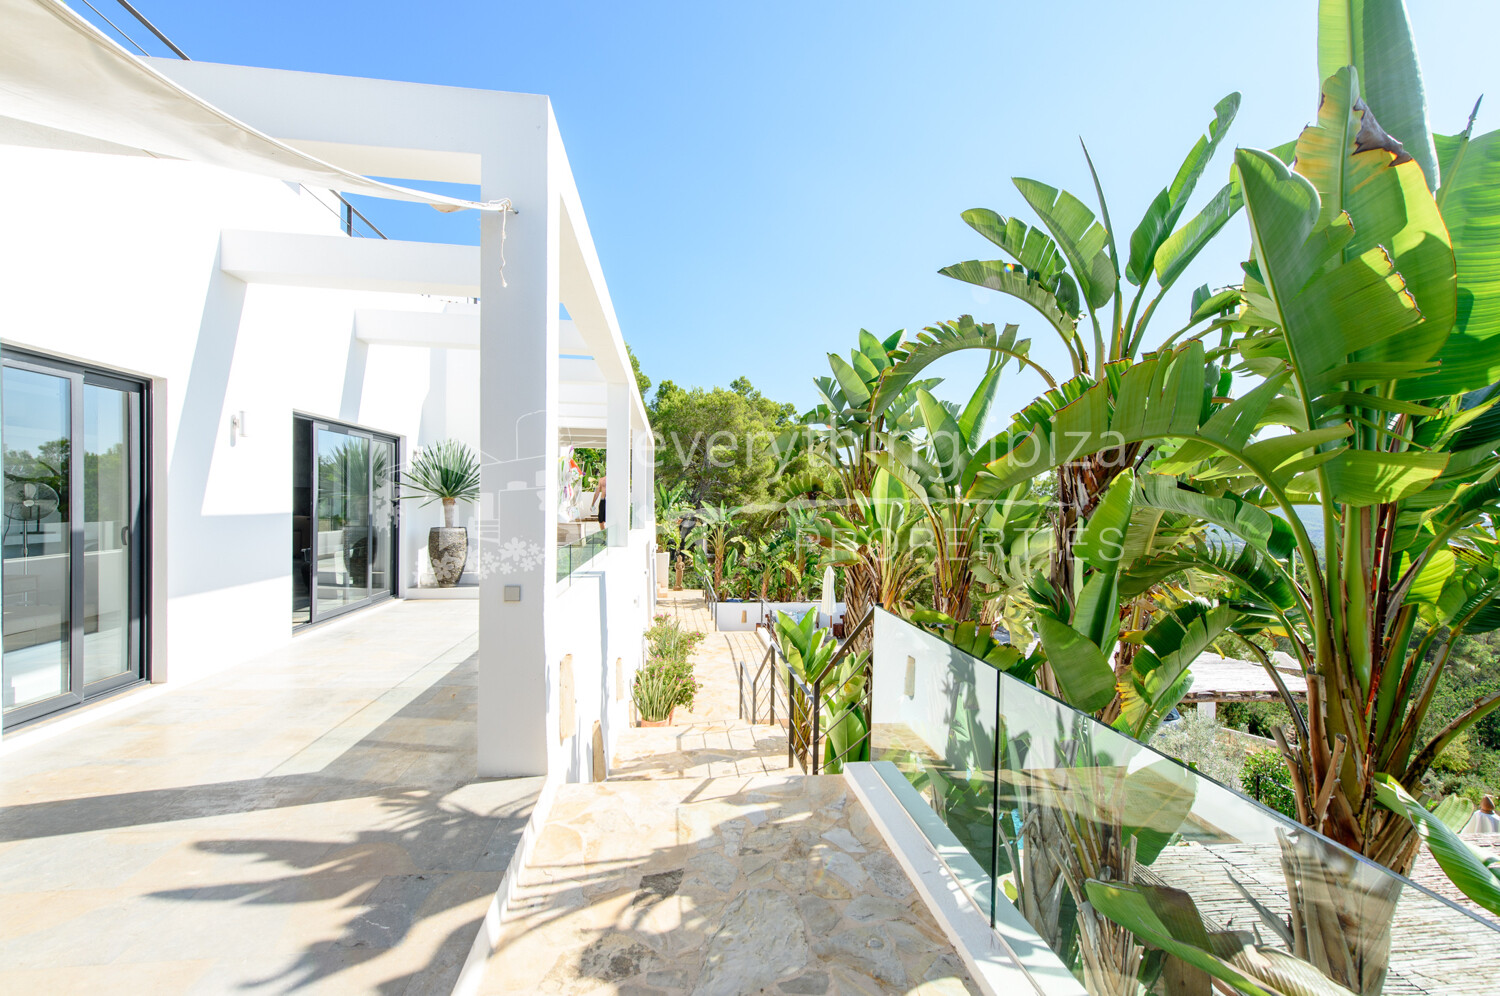 Spacious Villa with Elevated Sea Views Es Cubells, ref.1650, for sale in Ibiza by everything ibiza Properties